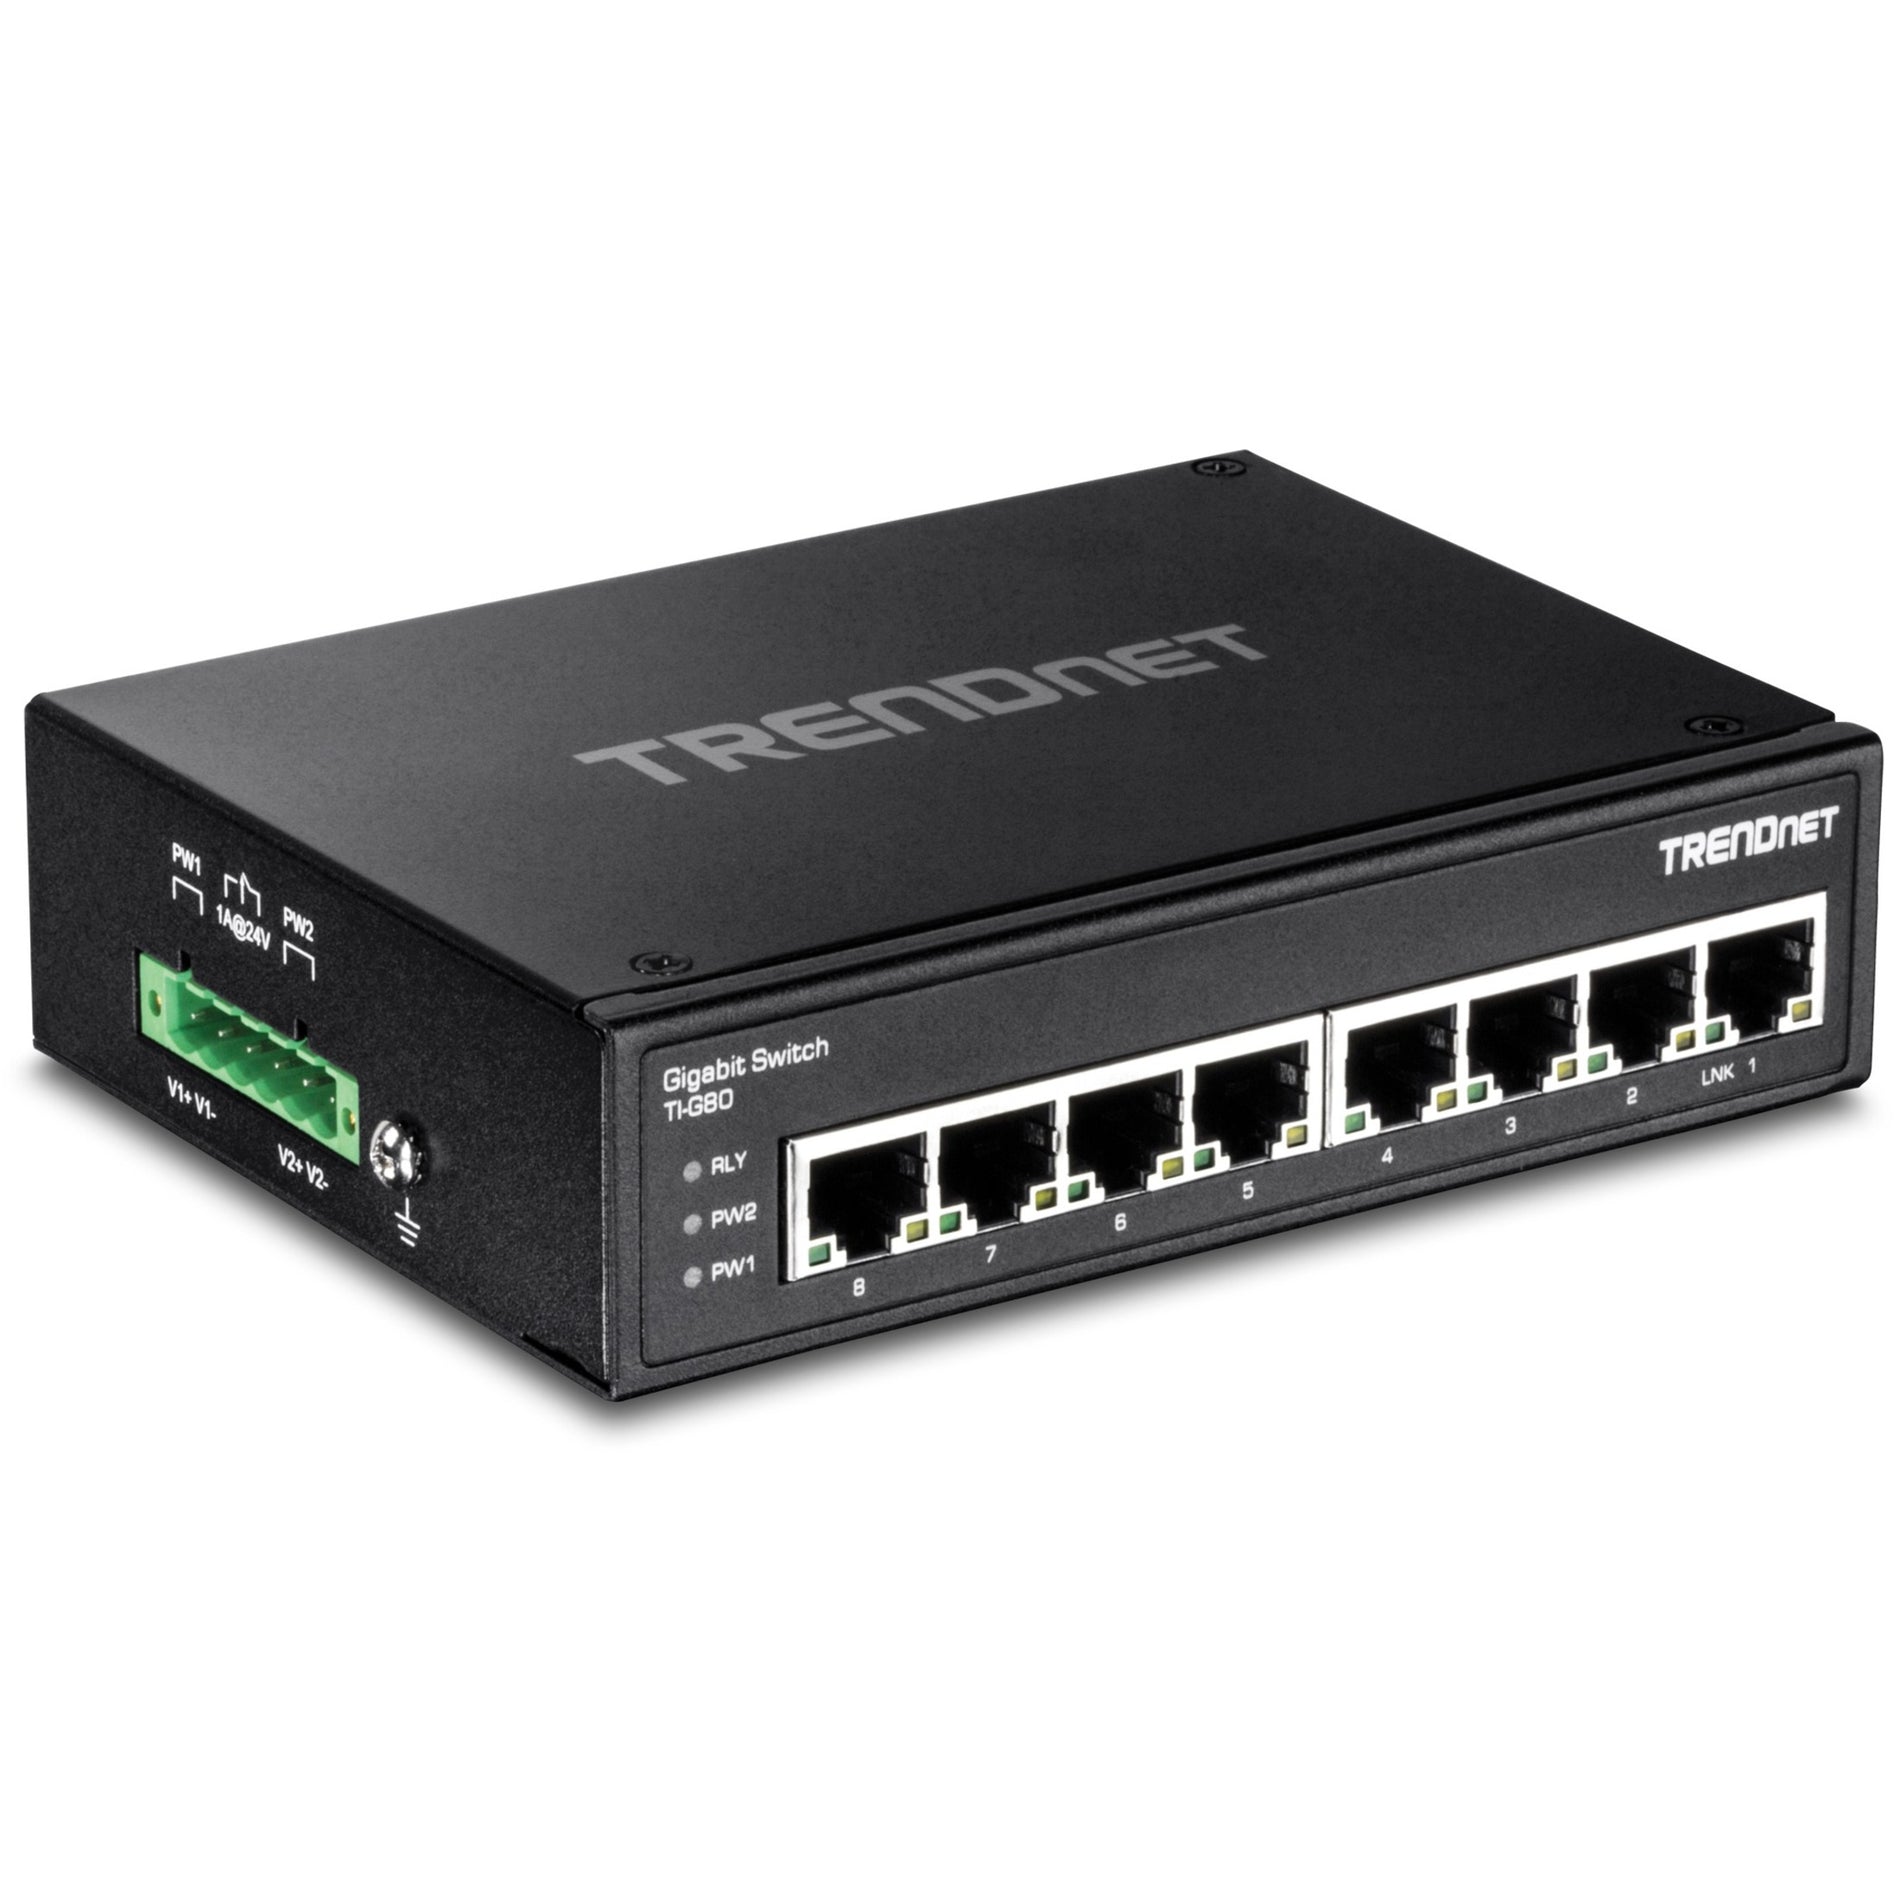 TRENDnet TI-G80 8-port Hardened Industrial Gigabit Switch, 16 Gbps Switching Capacity, IP30 Rated Metal Housing, Lifetime Protection